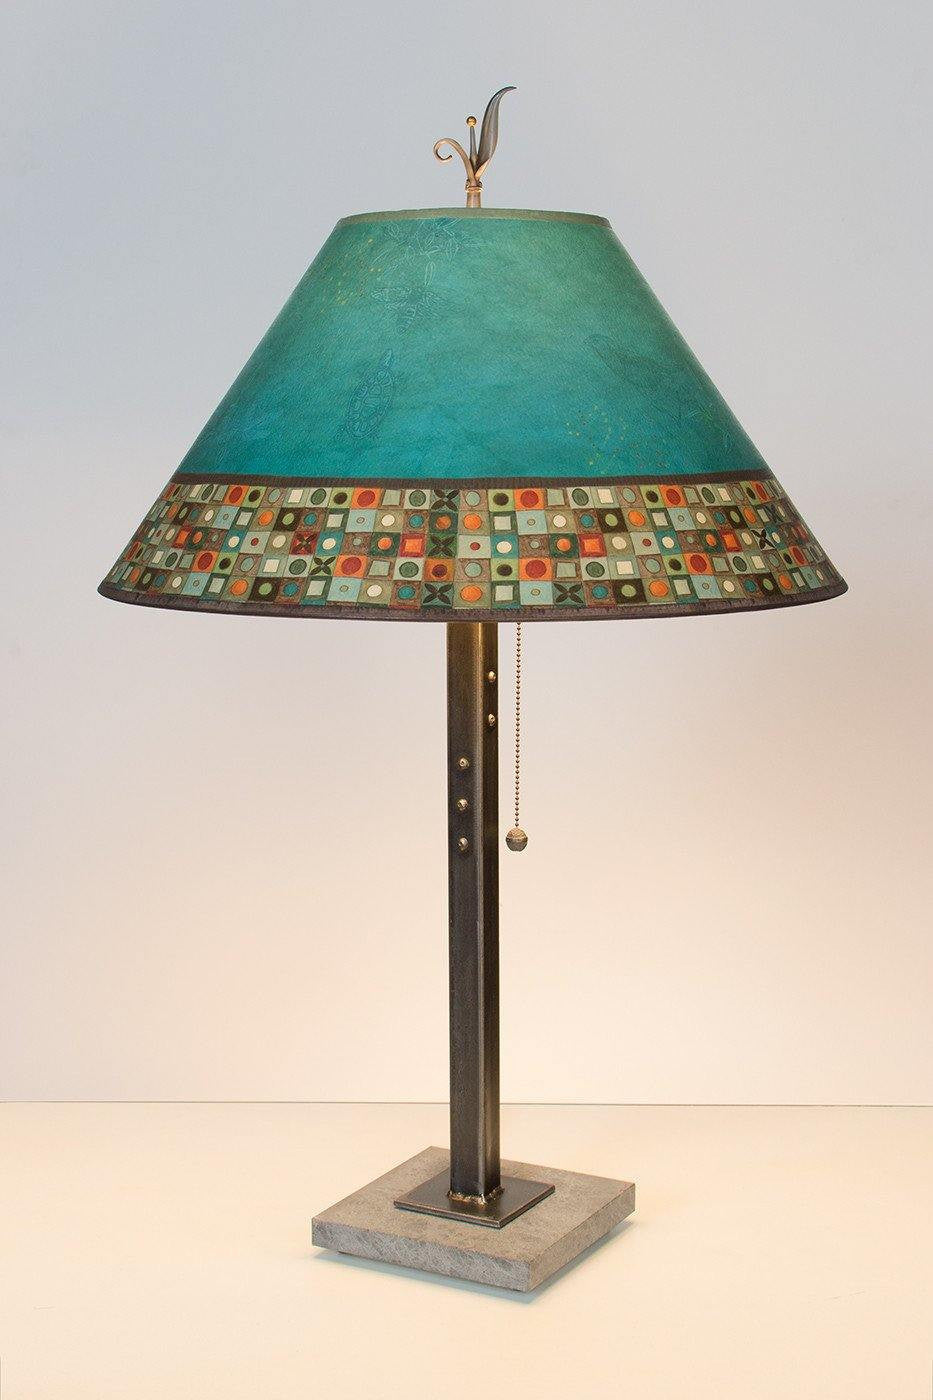 Janna Ugone & Co Table Lamps Steel Table Lamp with Large Conical Shade in Jade Mosaic